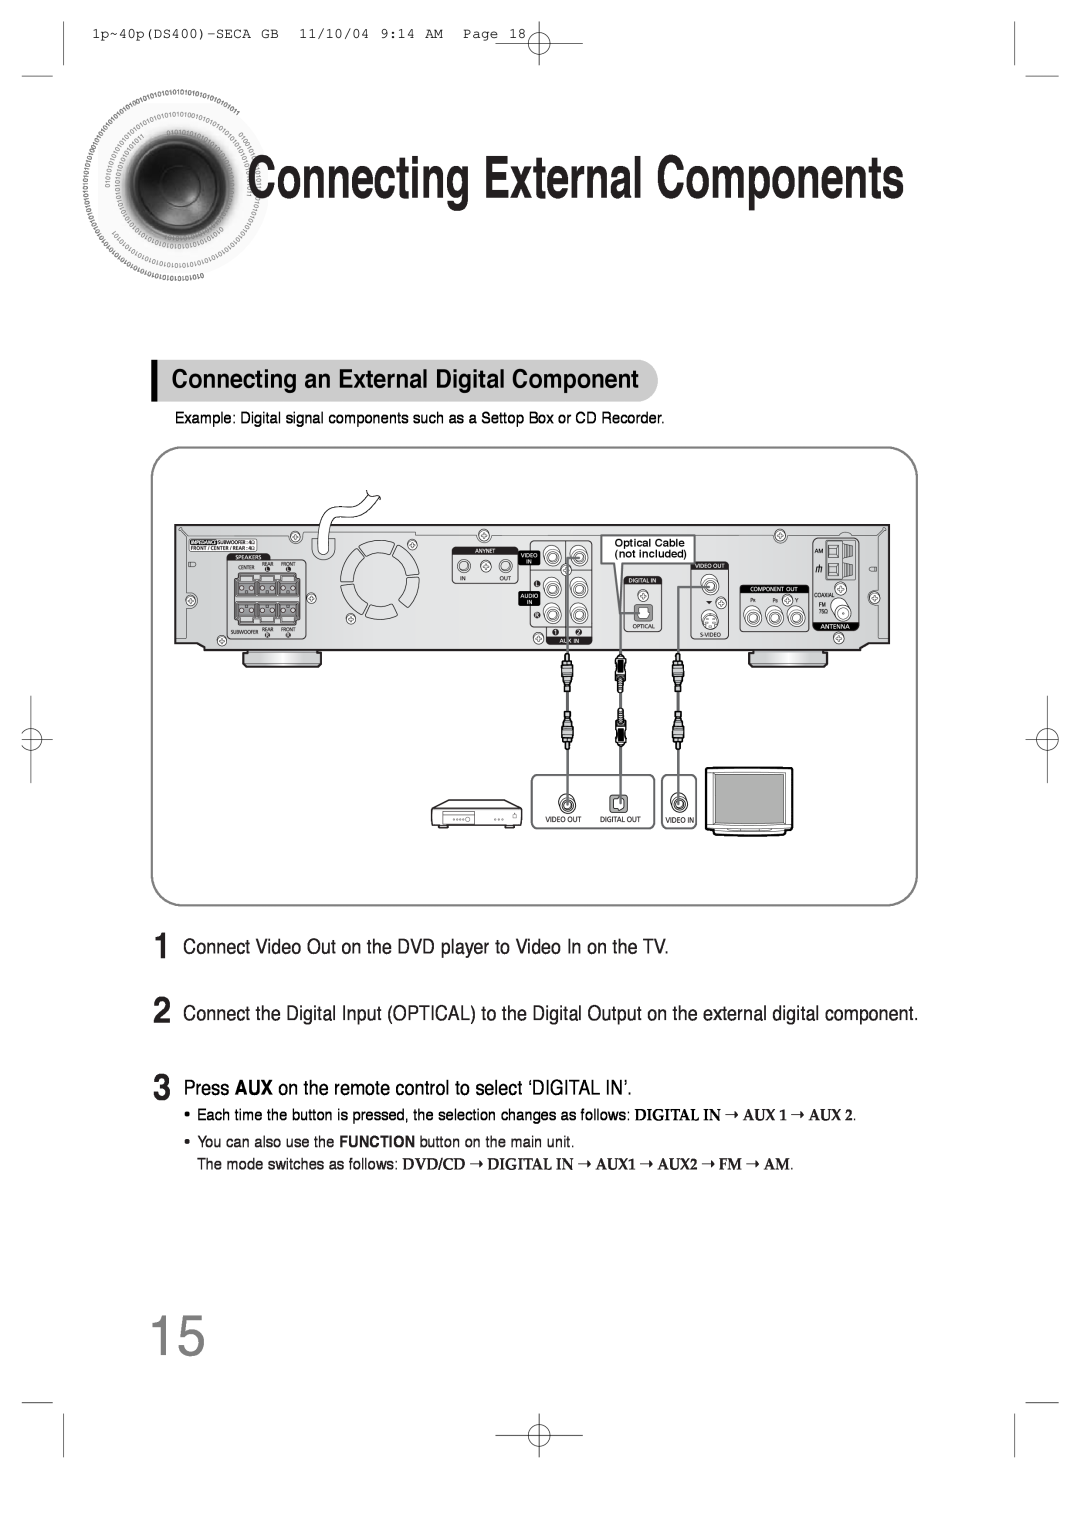 Samsung HT-DS400 instruction manual Connecting an External Digital Component, ConnectingExternal Components 